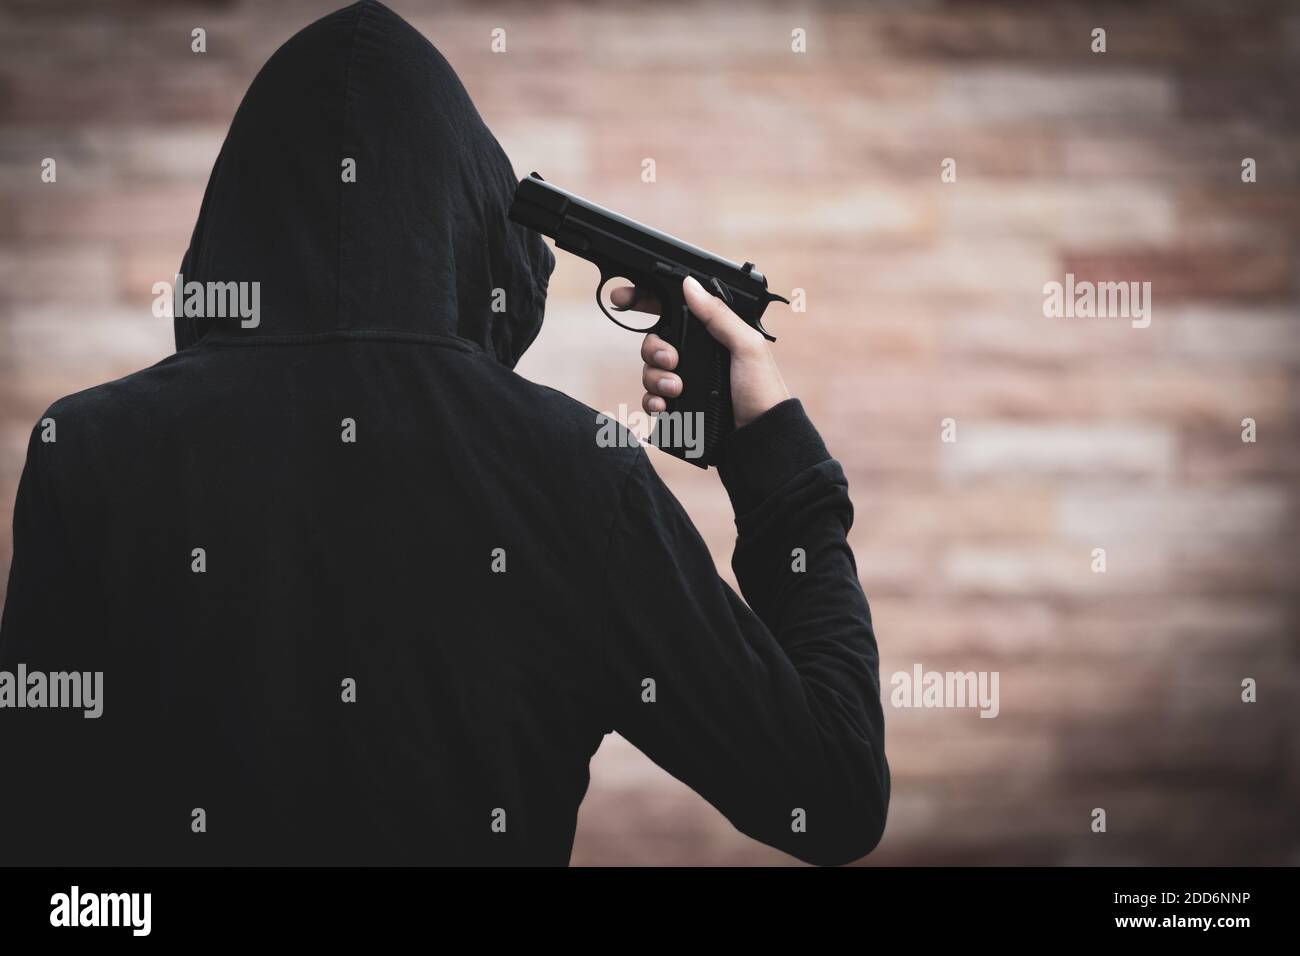 A man commits suicide with a pistol to kill himself. Young man pointing a gun to his head. Suicide concept. Stock Photo